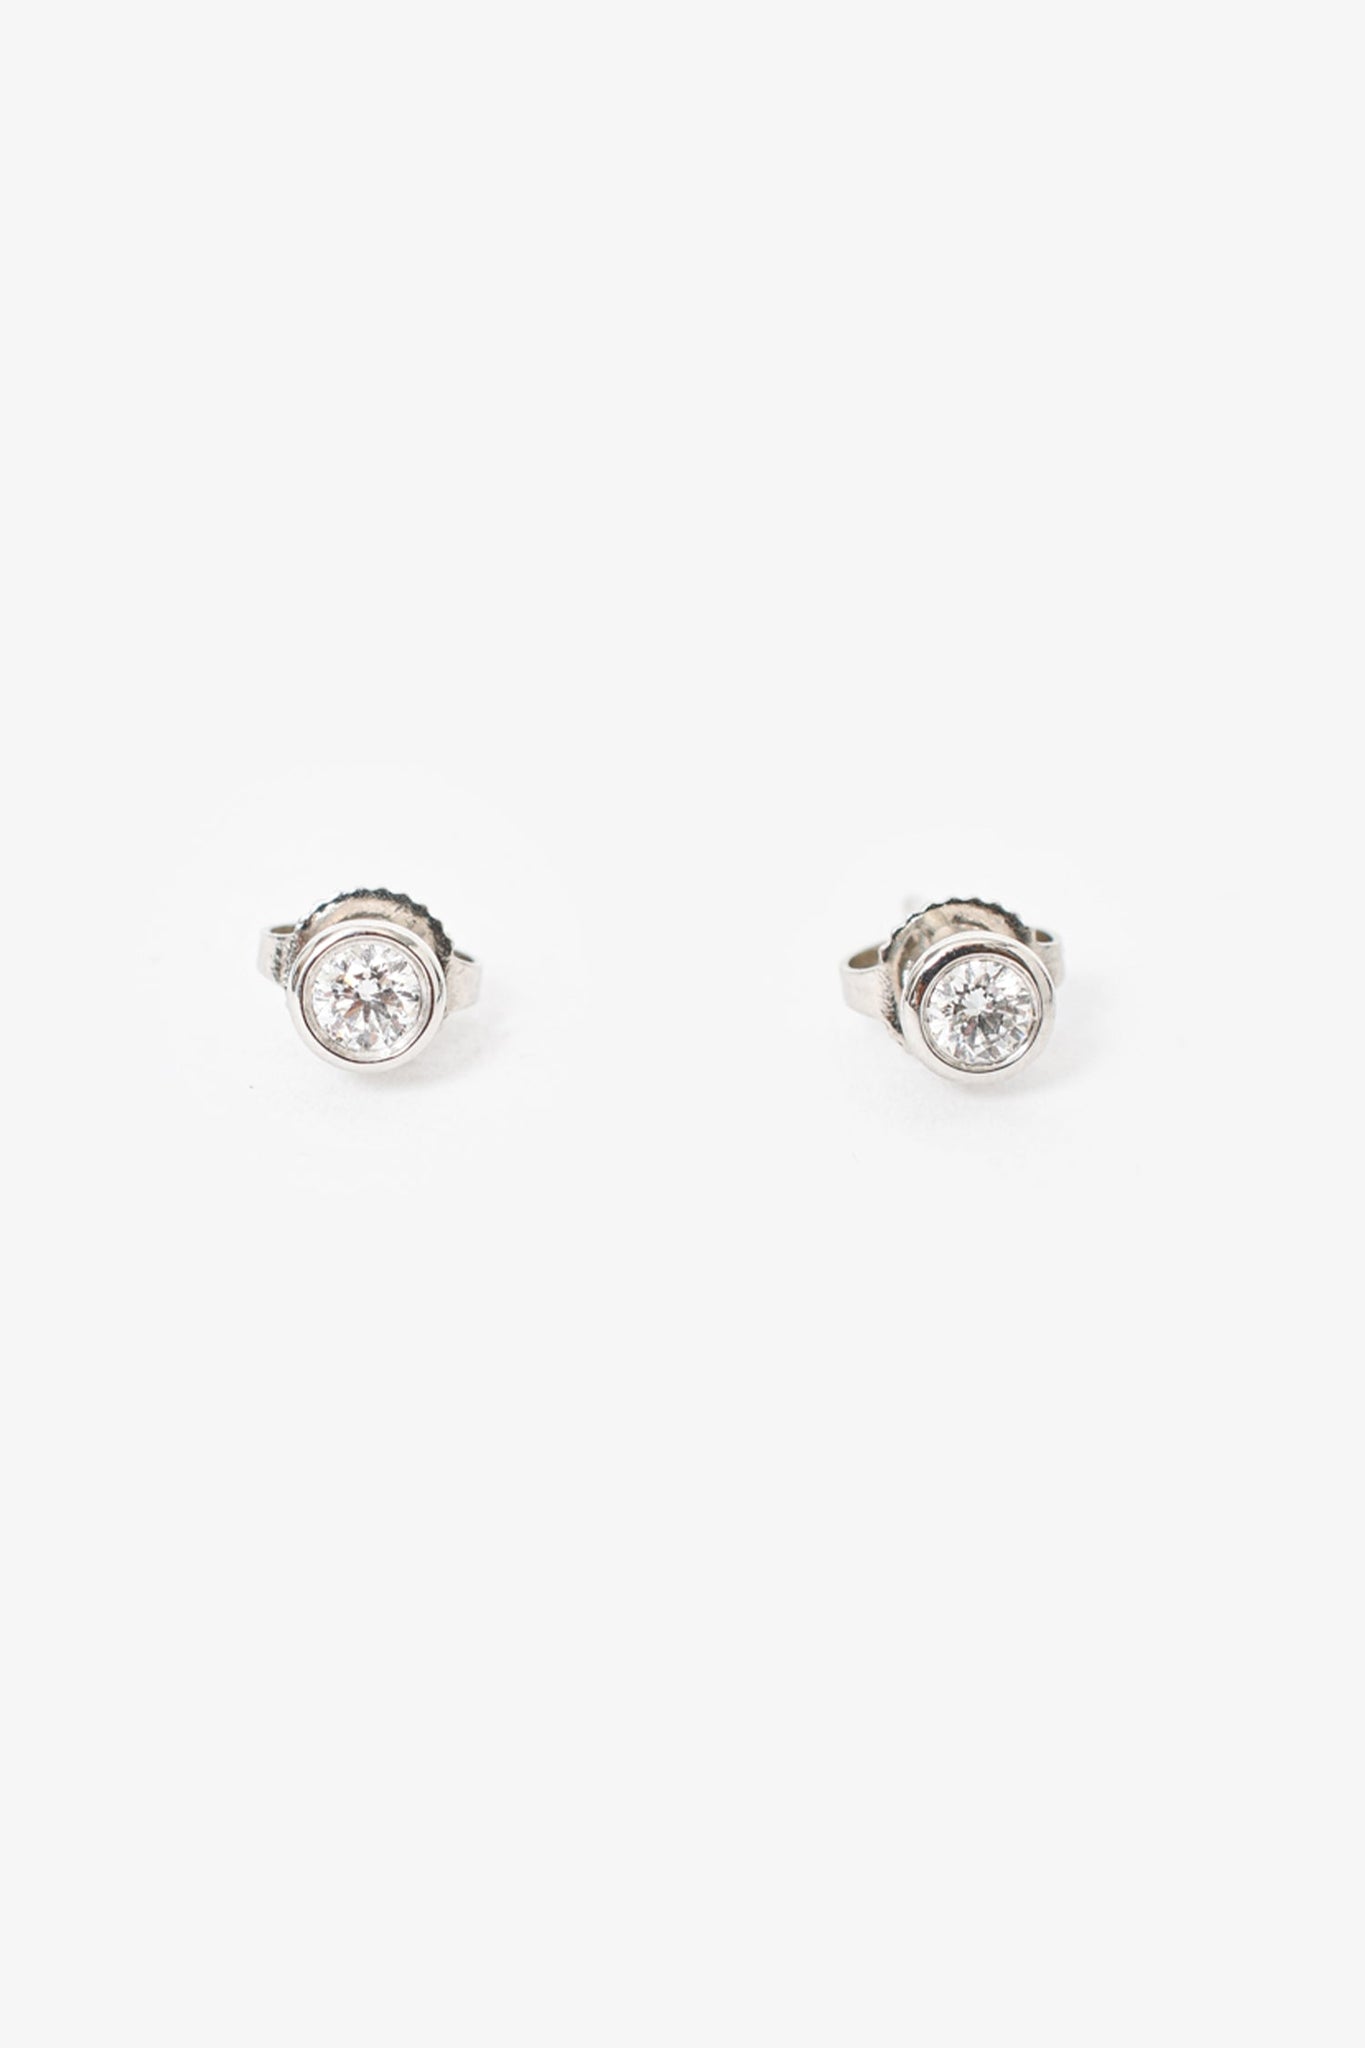 Faith Sterling Silver Sterling Silver CZ Halo Round Stud Earrings 9x9mm   Jewellery from Faith Jewellers UK